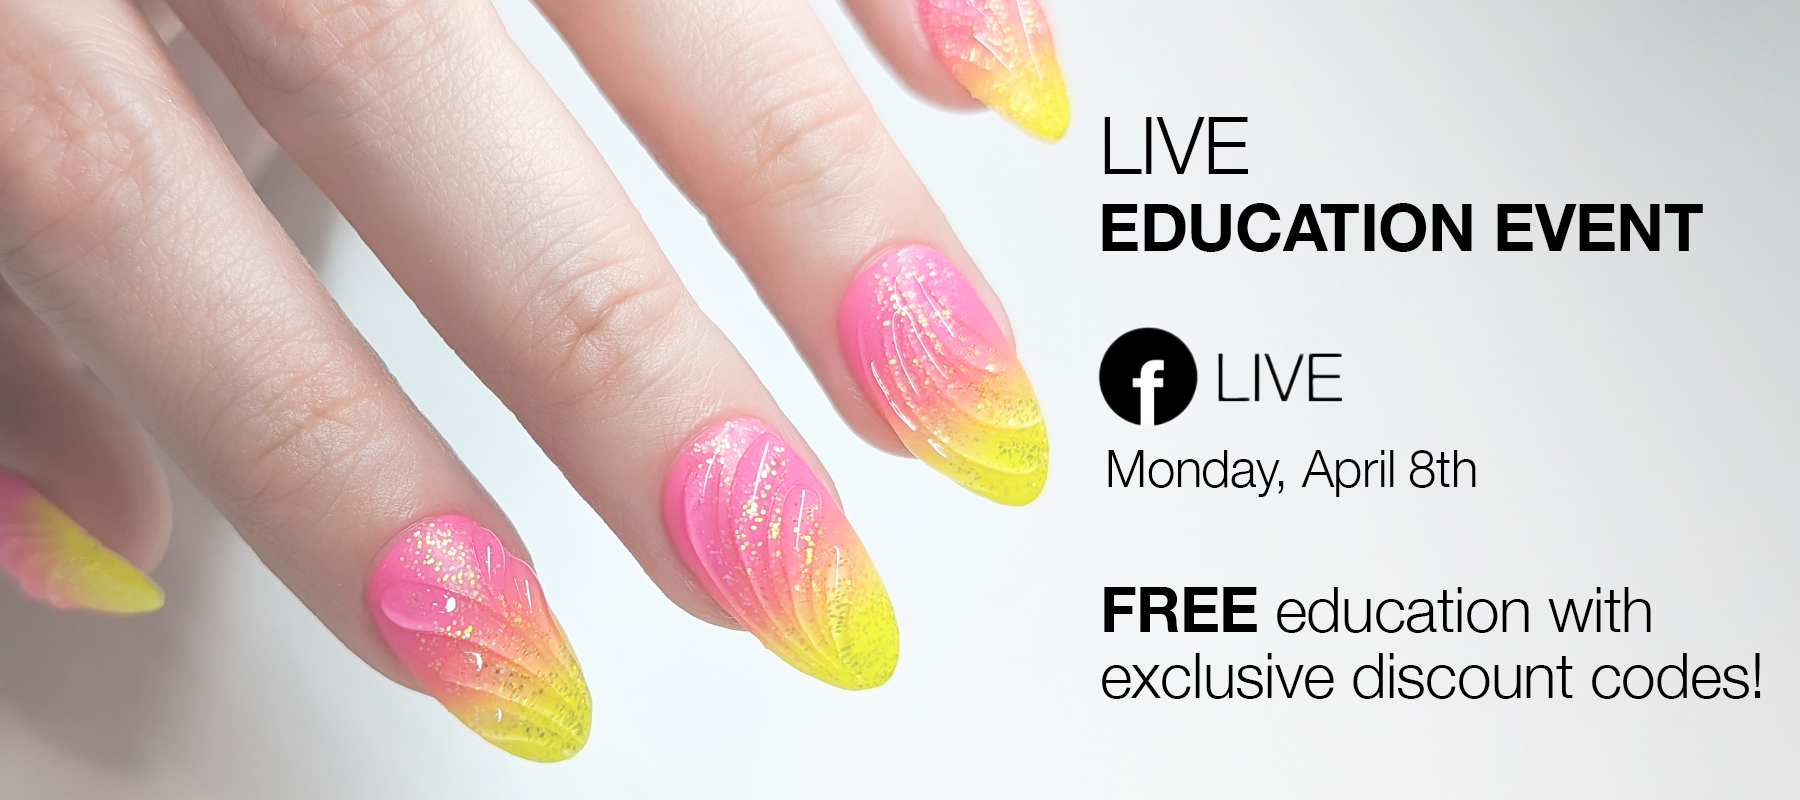 FREE Education Event | Live Recordings Available to Watch!